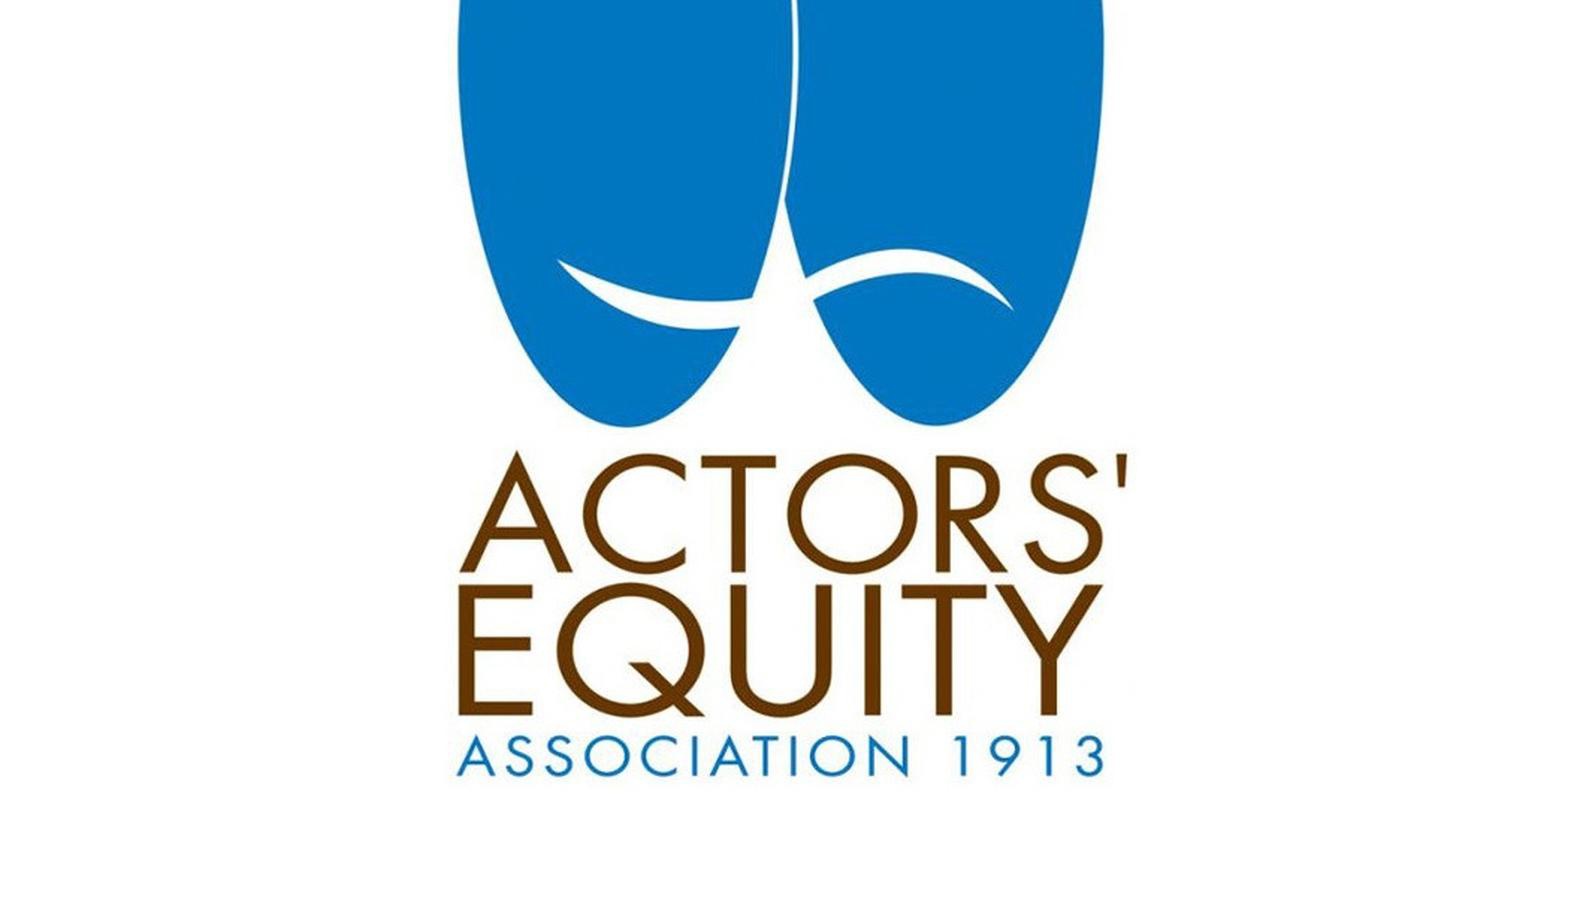 How to Join the Actors’ Equity Association